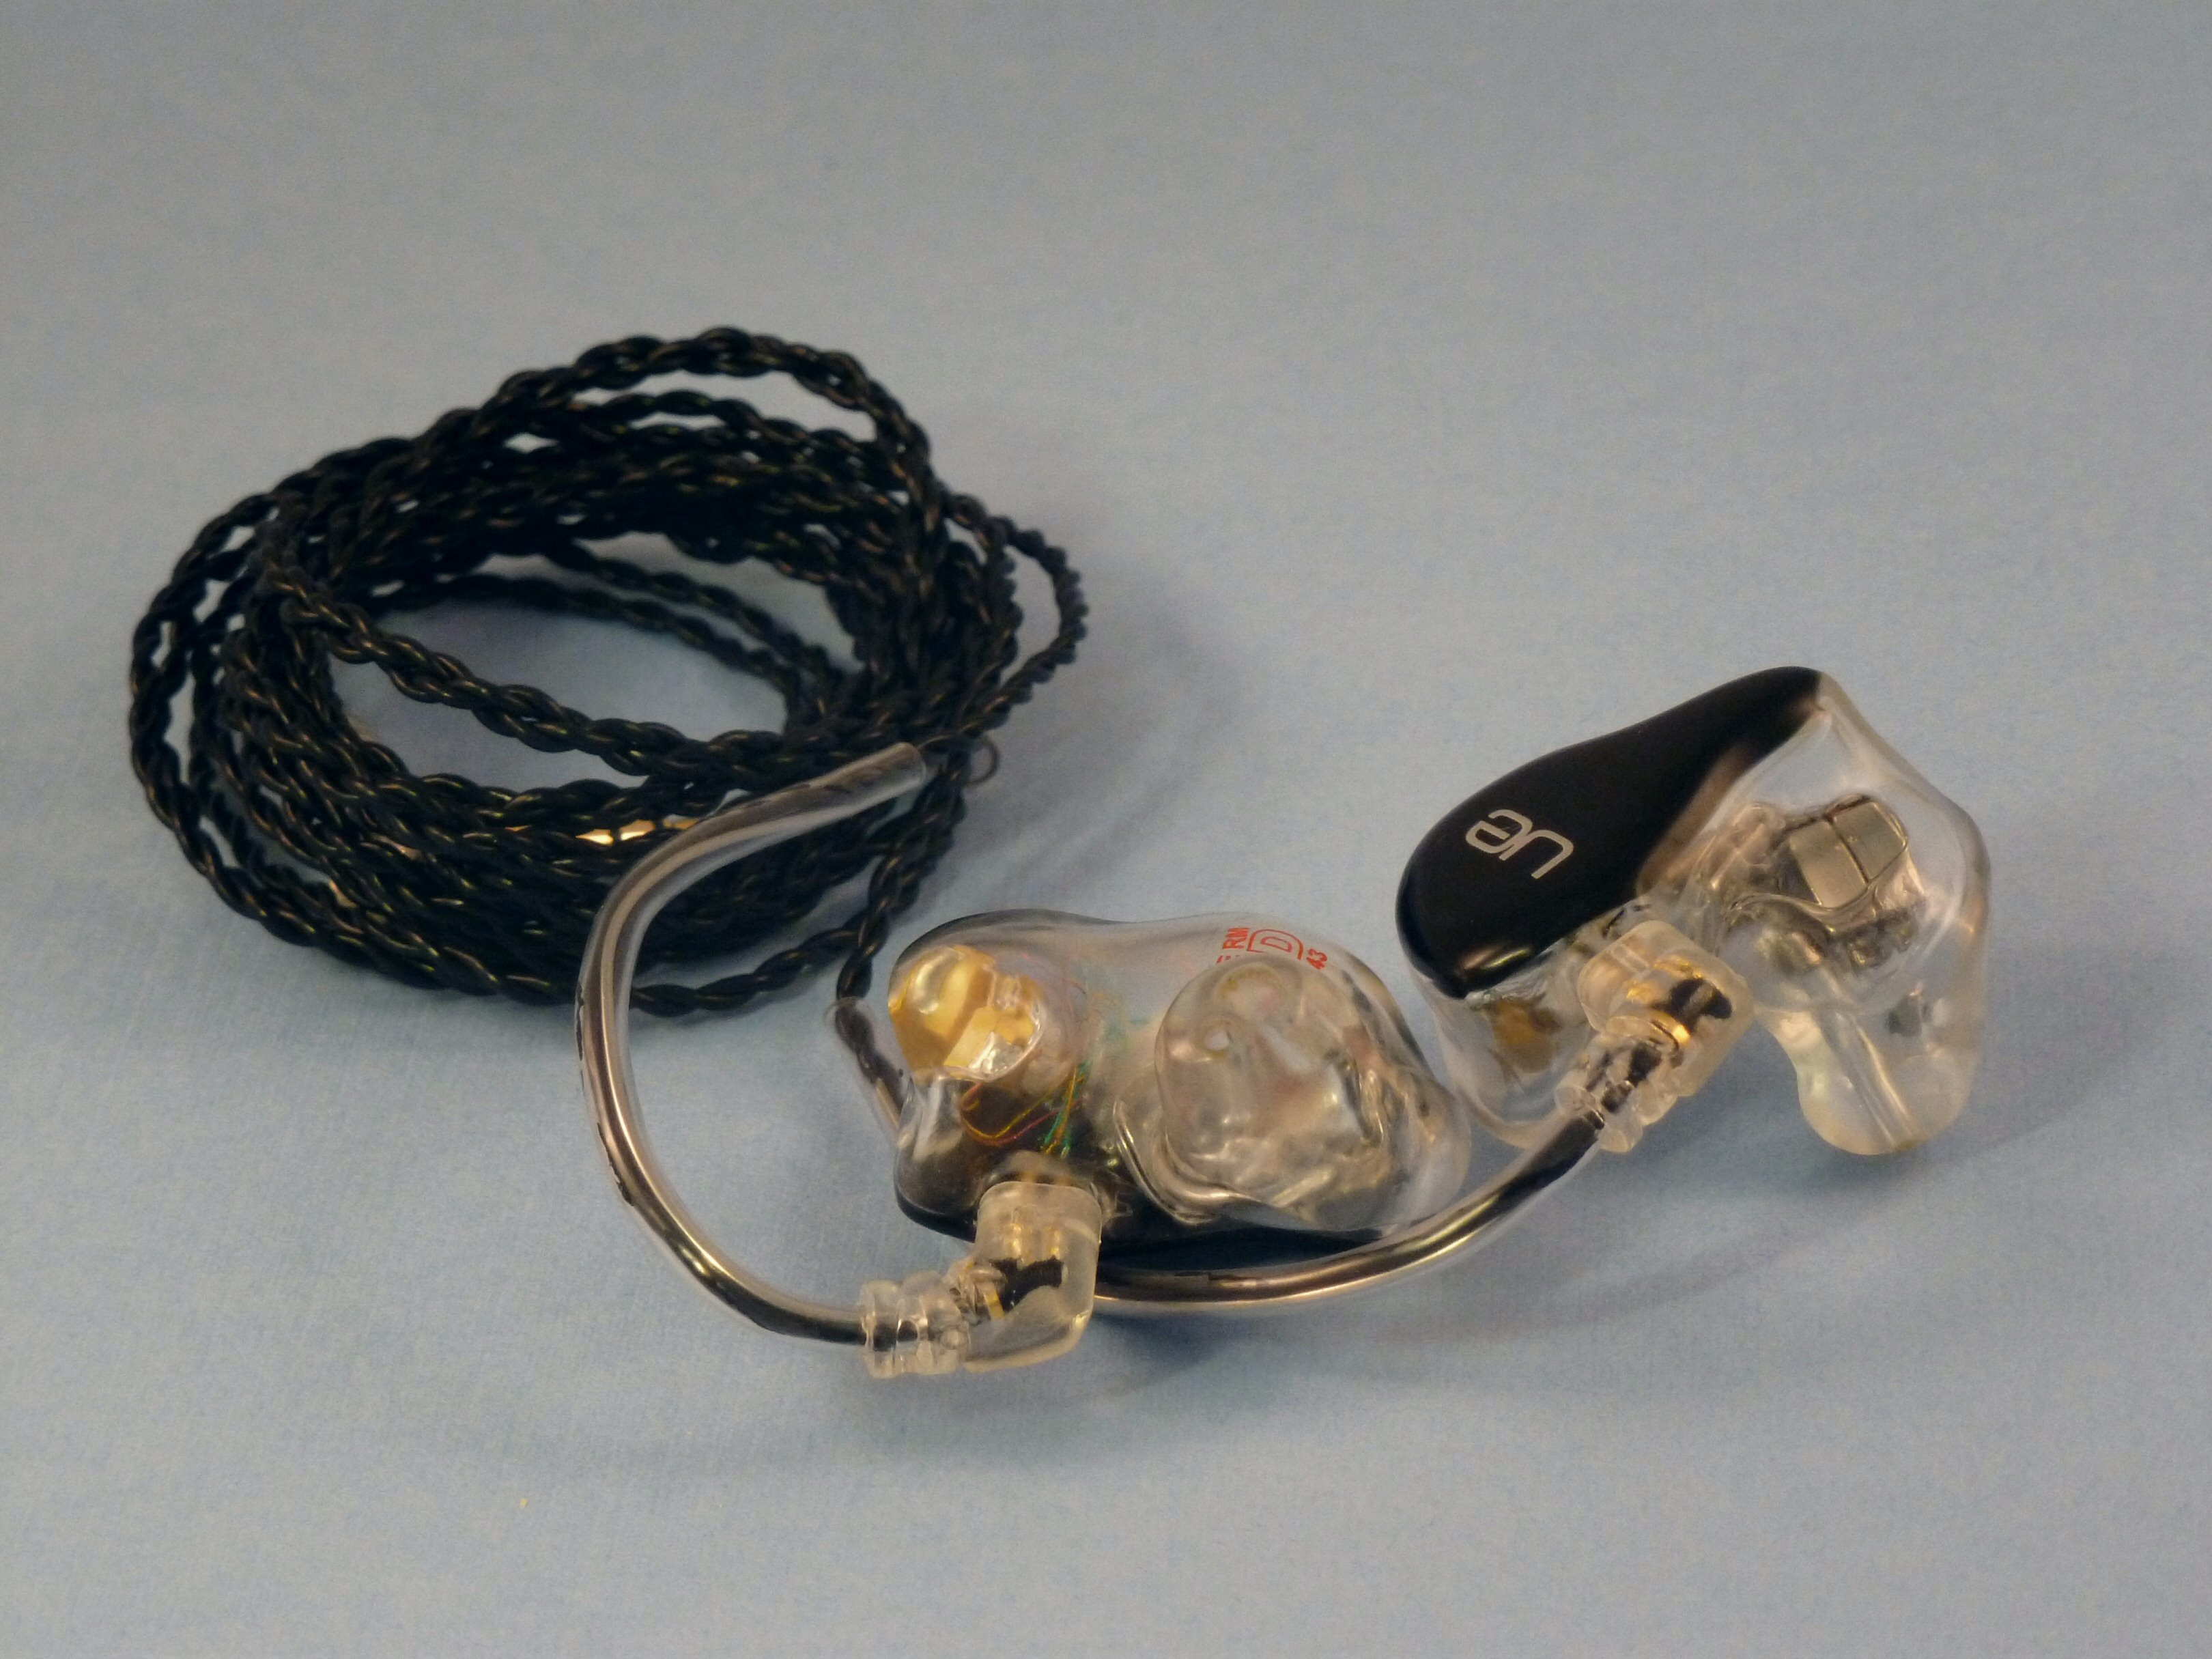 THE ULTIMATE GUIDE TO CUSTOM IN-EAR MONITORS 